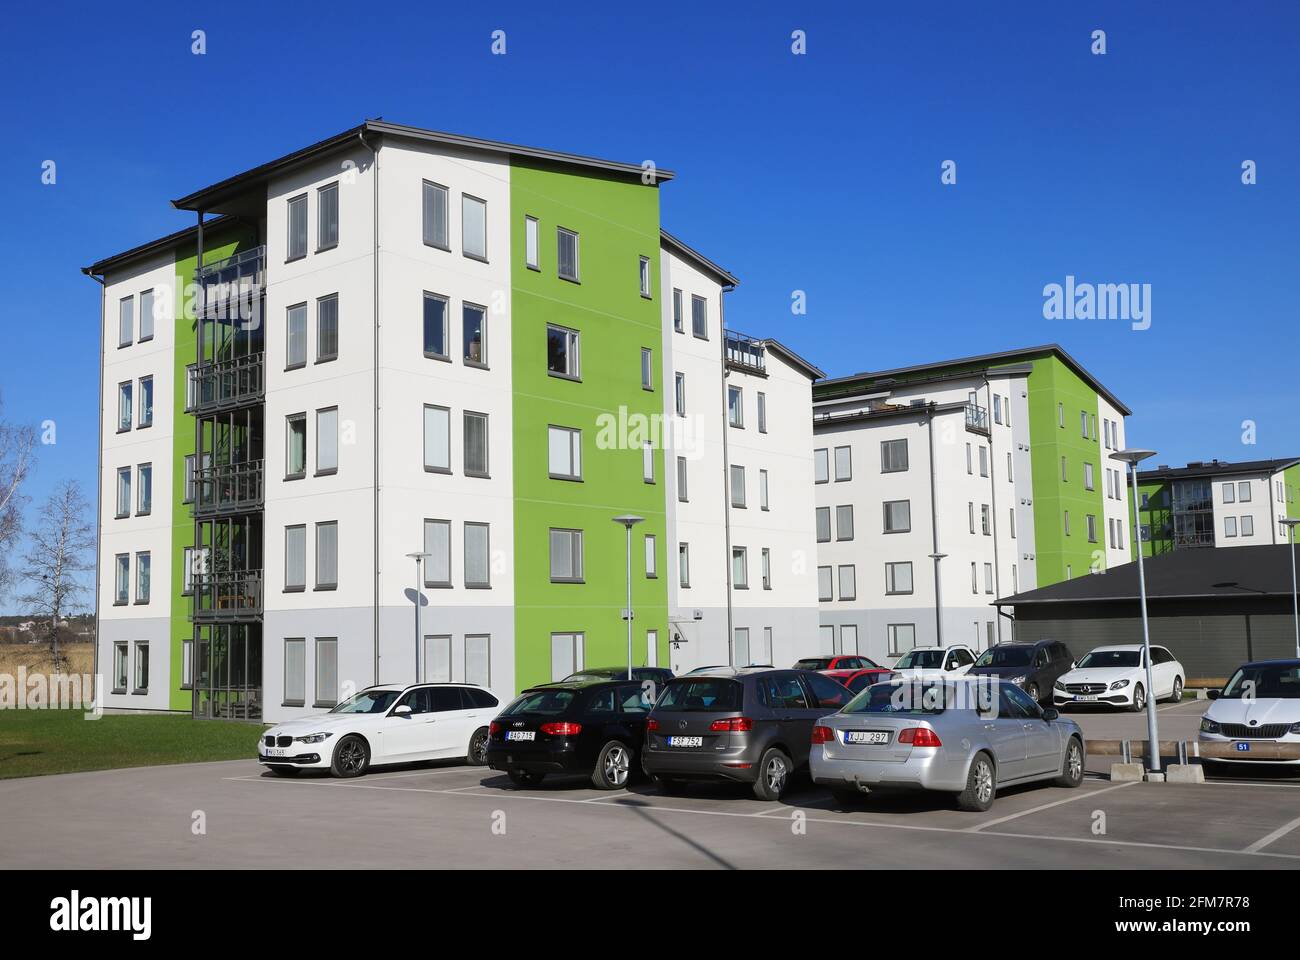 Nykoping, Sweden - April 18, 2021: Modern 2020s multi-family five floors apartment residential buildings located at the strandparksgatan street. Stock Photo